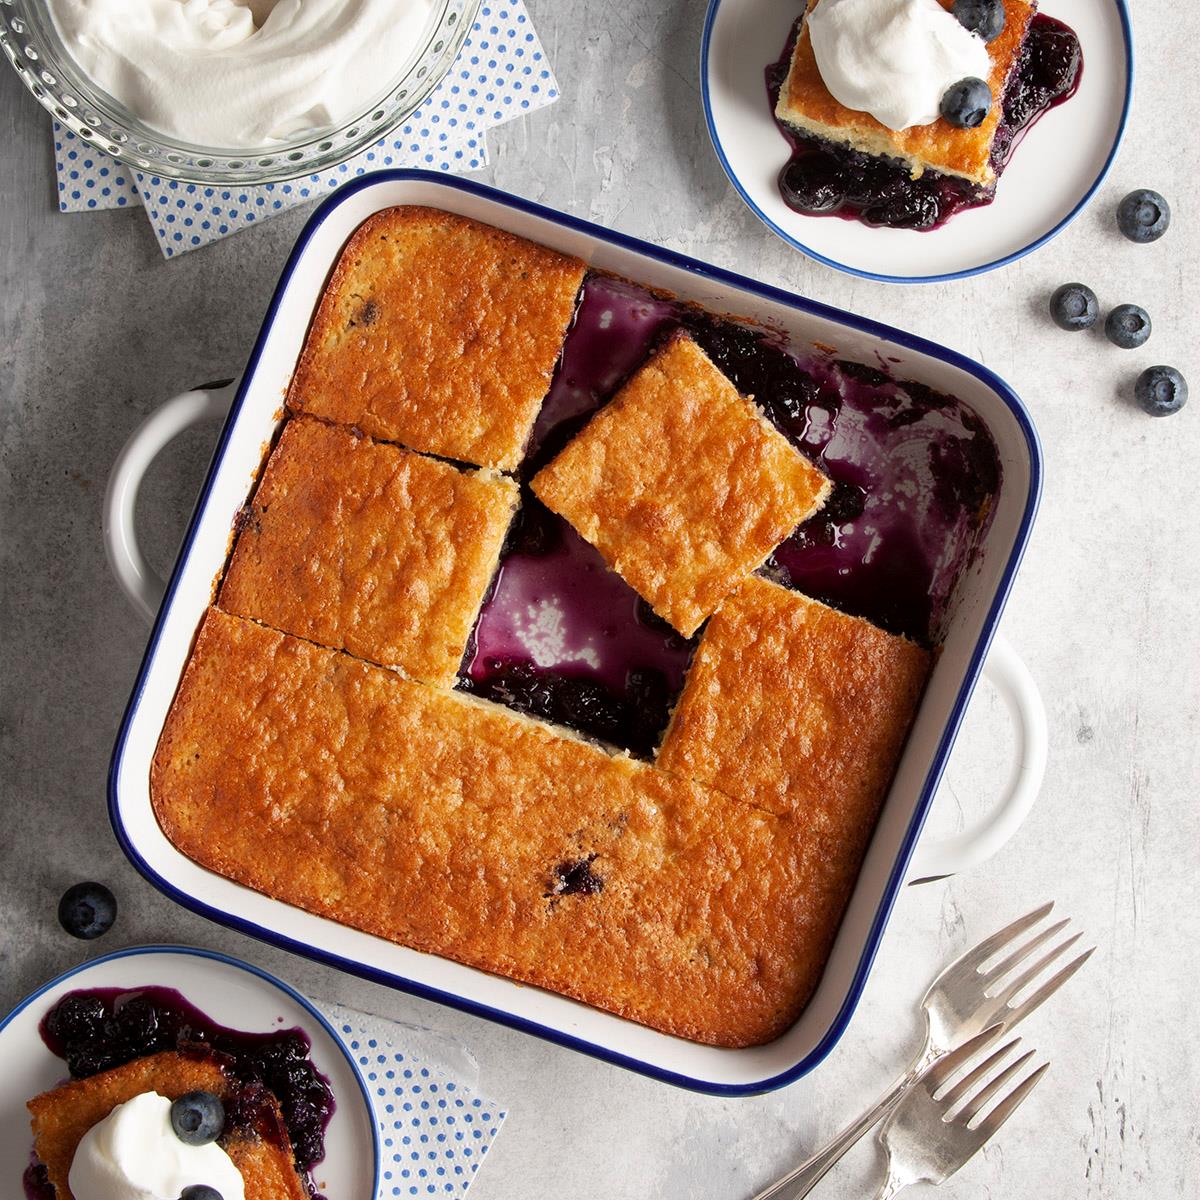 Details more than 130 french blueberry cake - awesomeenglish.edu.vn